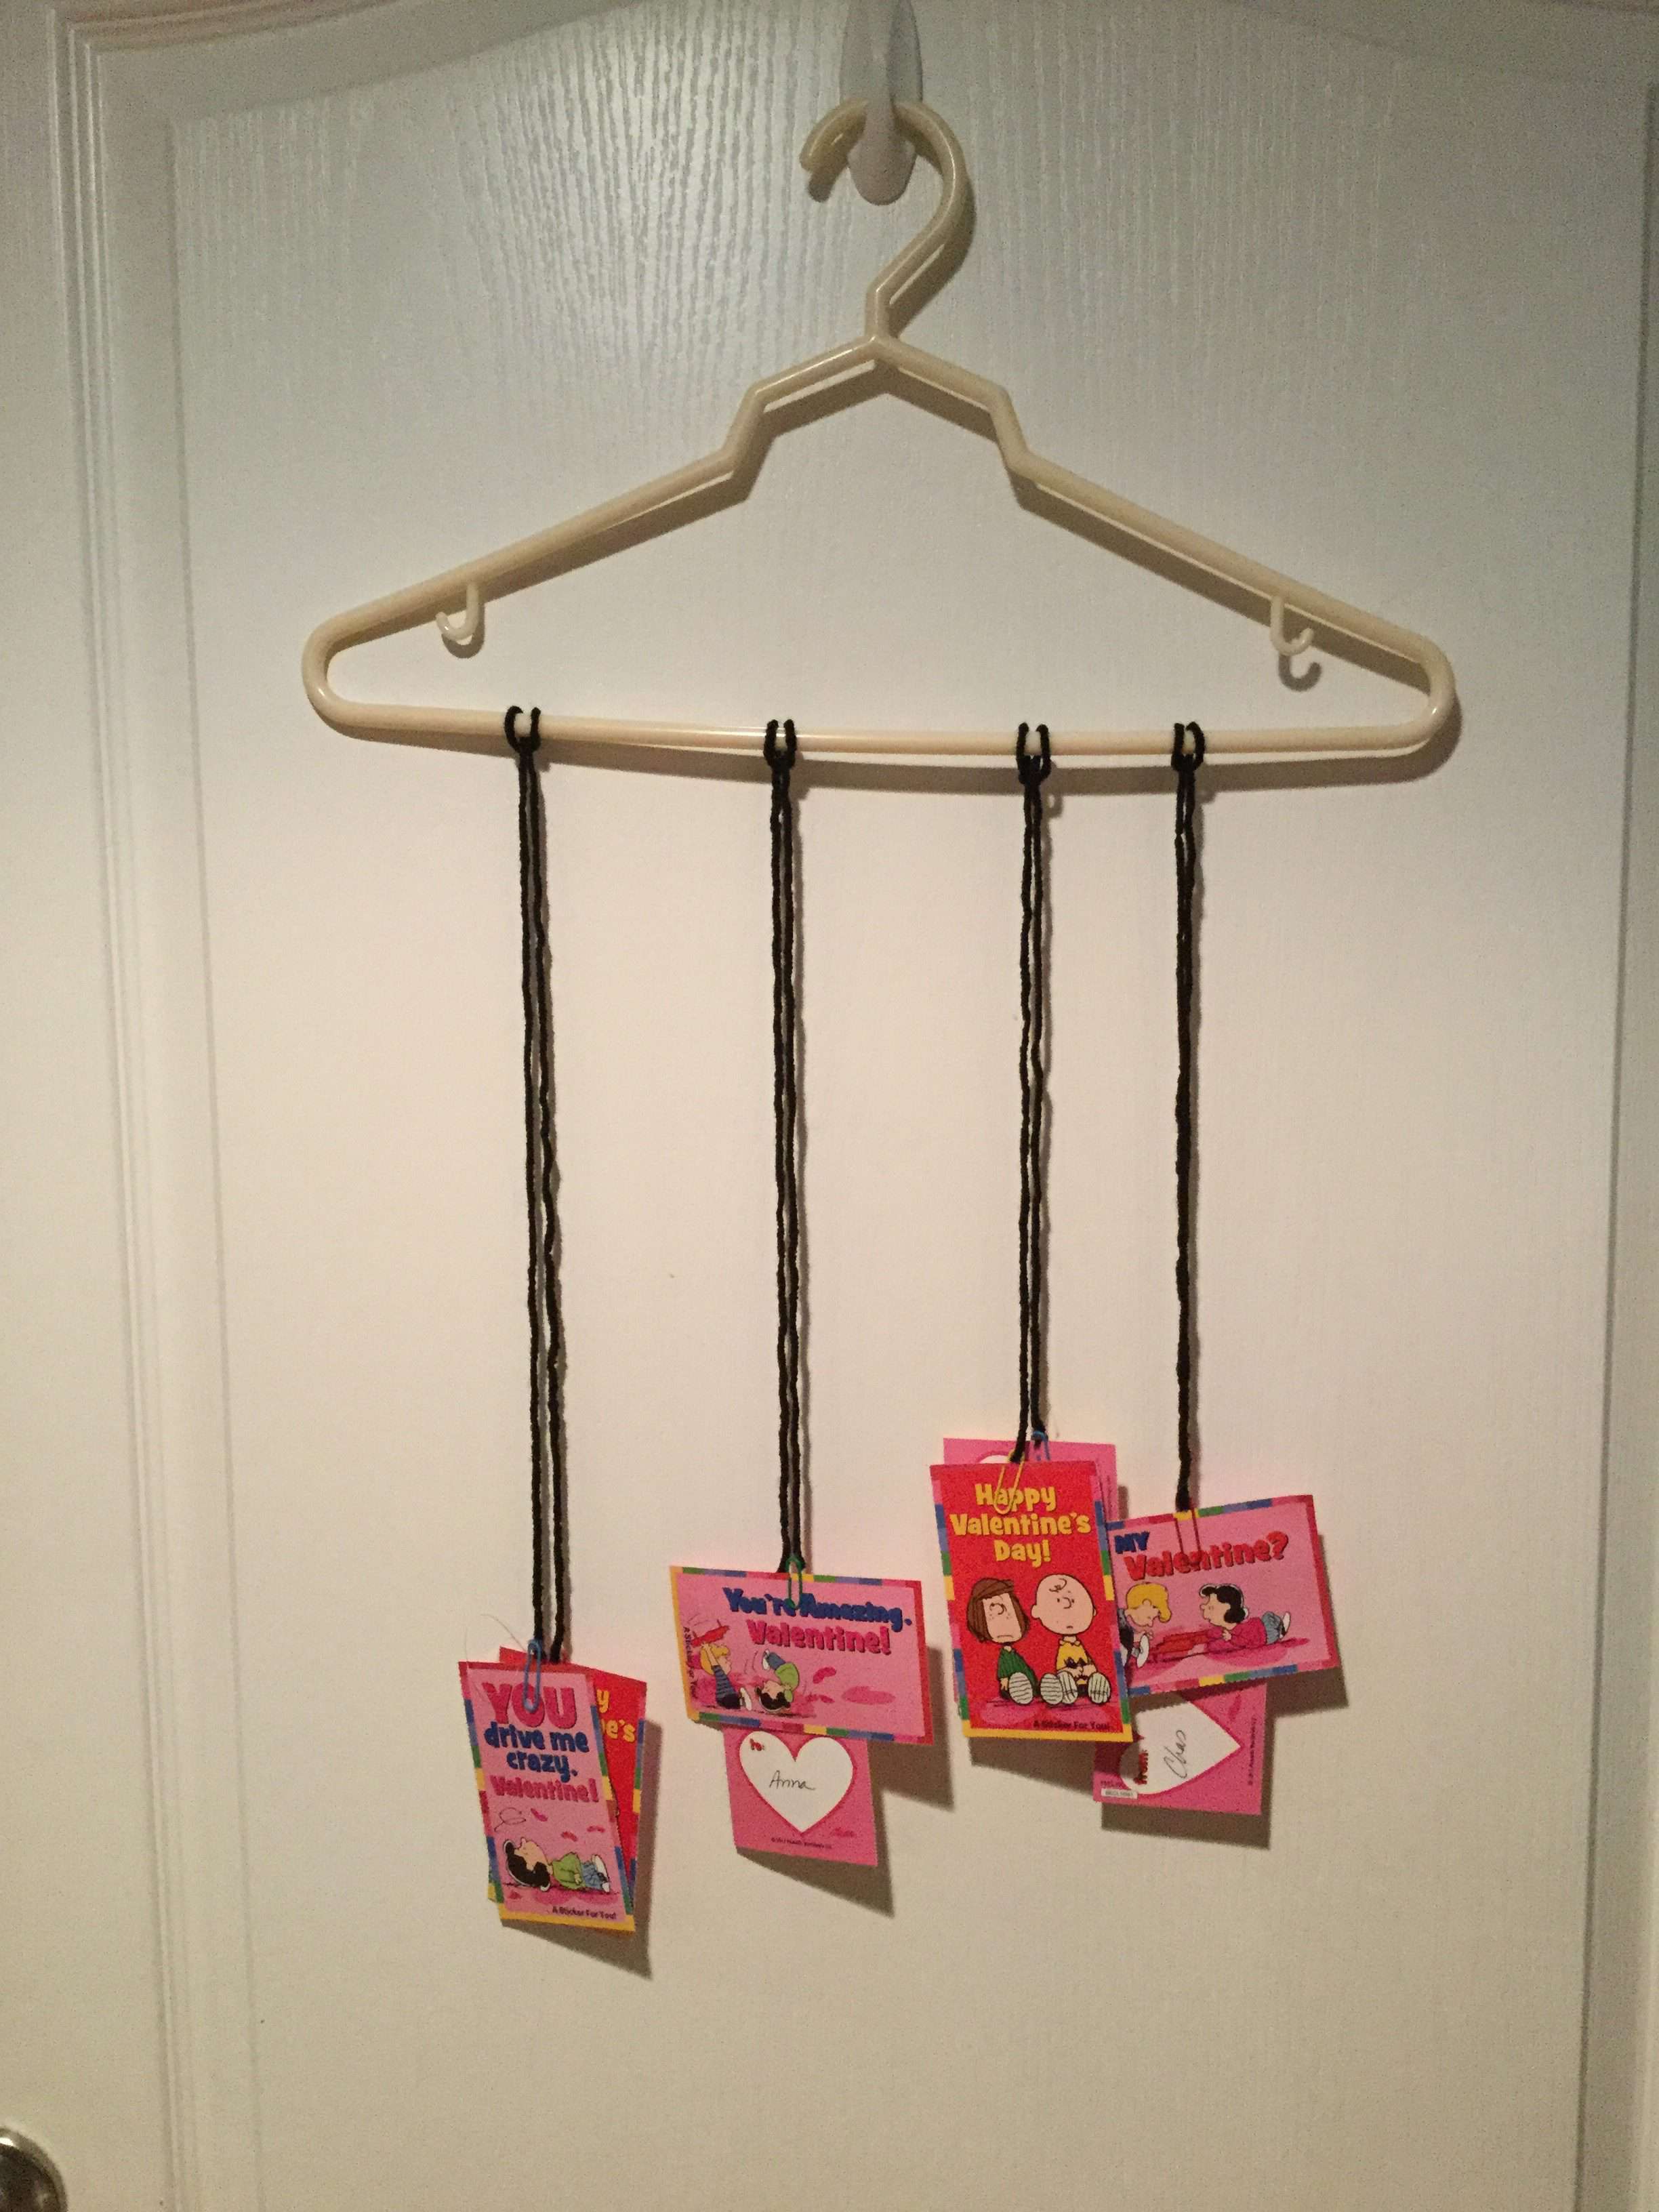 Have the kids place their Valentine's in the paper clips to complete the display.  You can vary the lengths of the string so that the Valentine's hang at different levels for display.